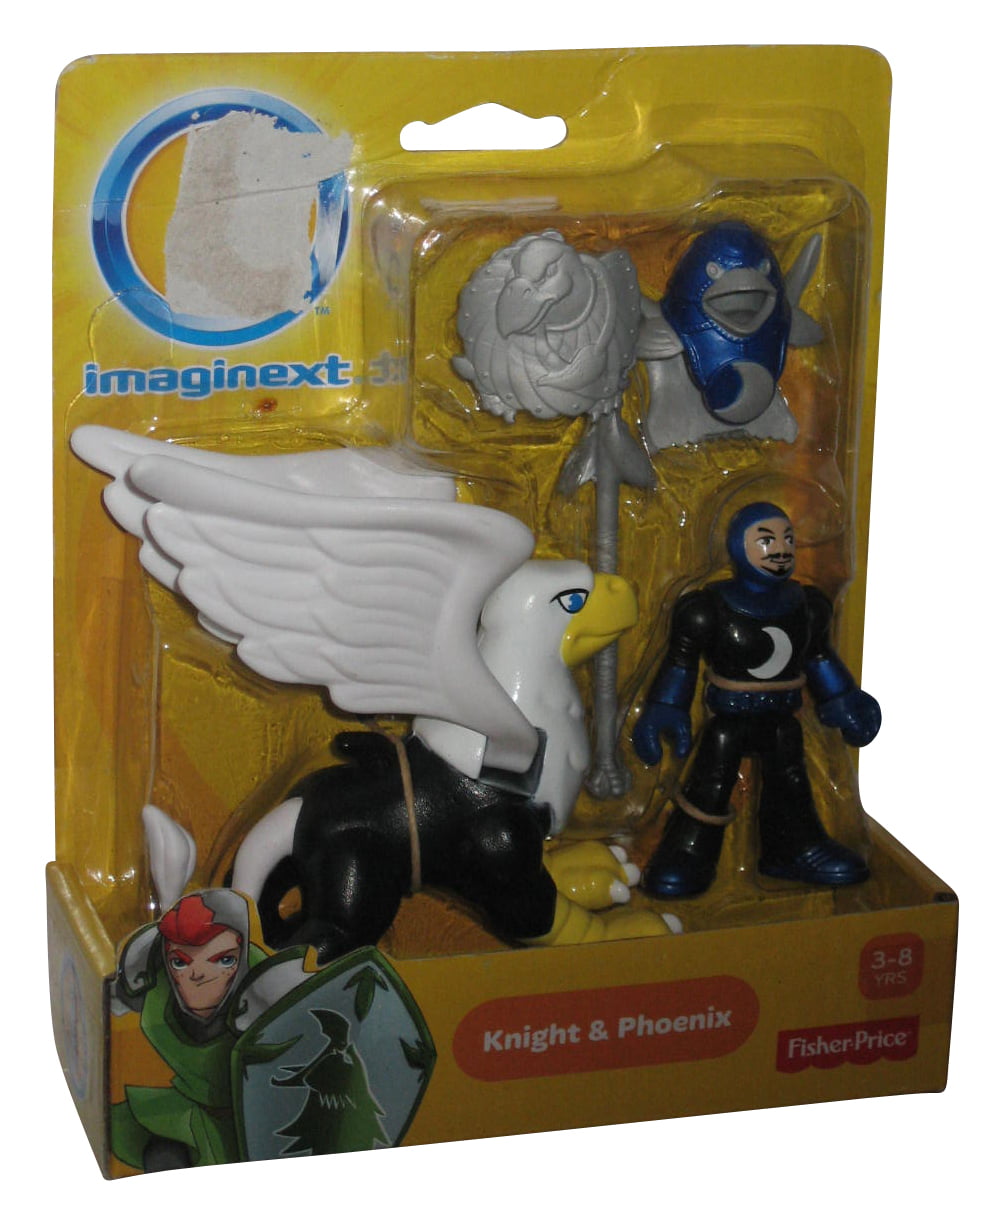 Fisher Price Imaginext Castle Blue Warrior Knight 